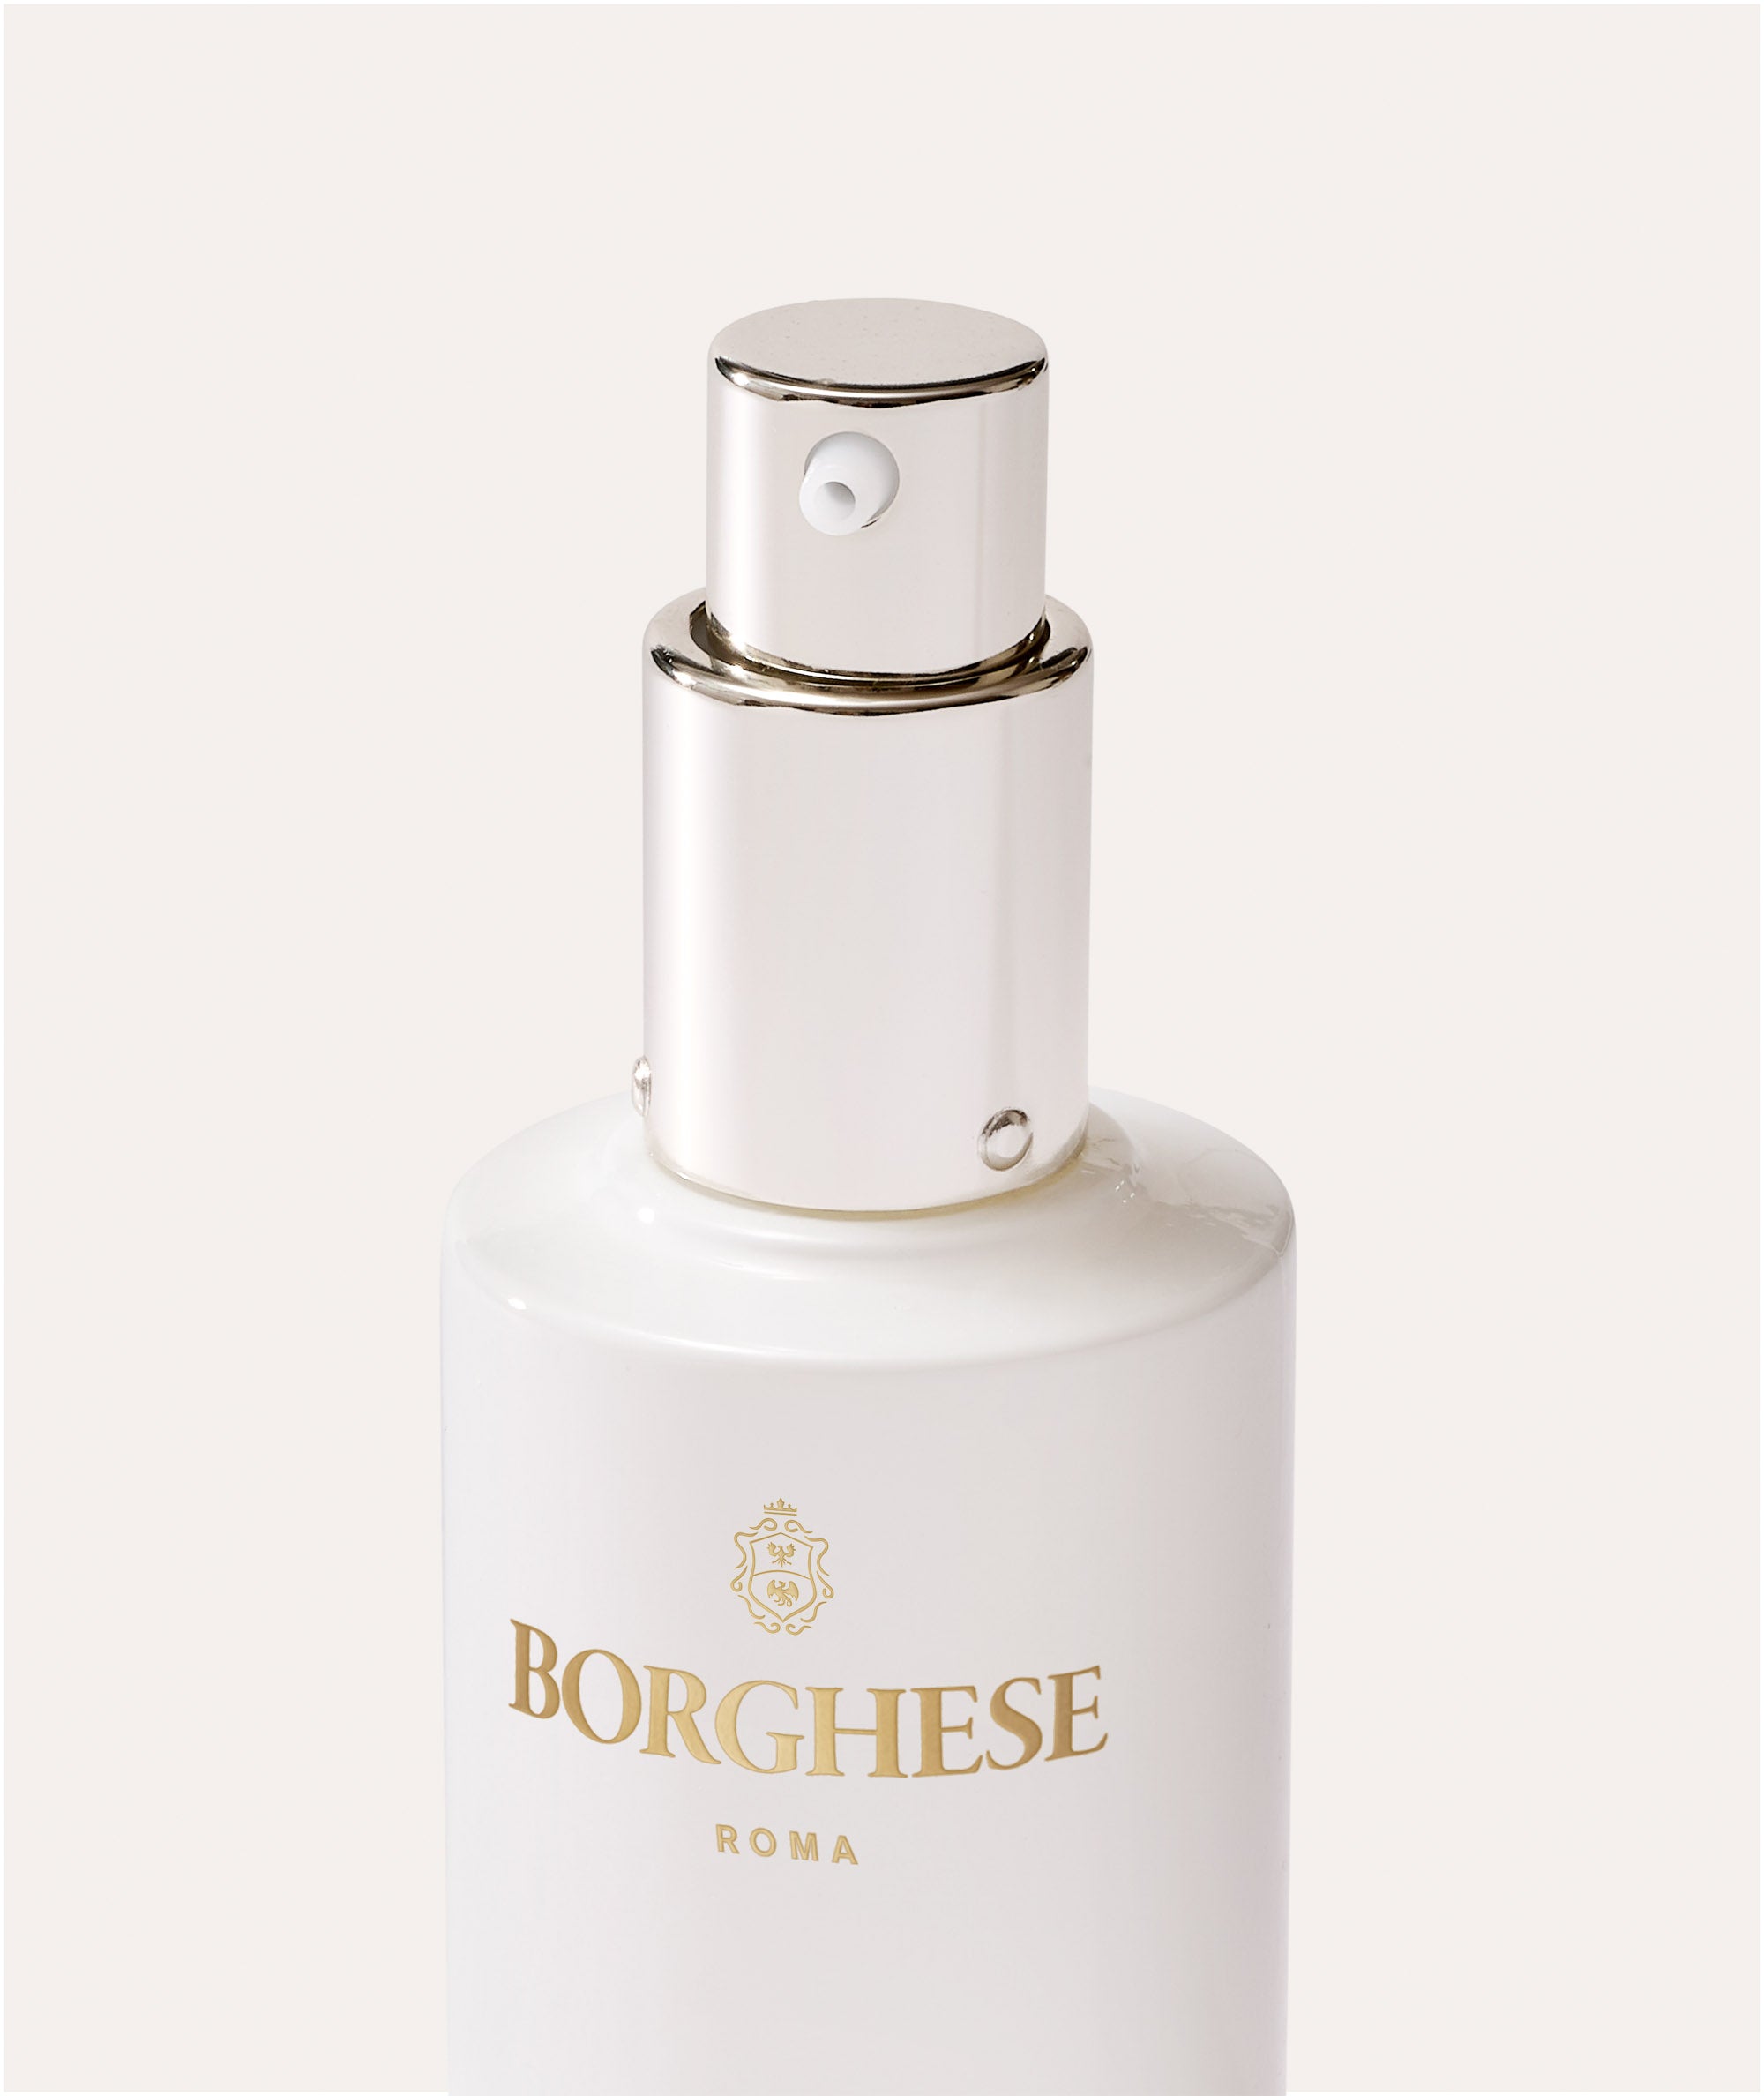 This is a picture of the Borghese Fluido Protettivo Advanced Eye Lift dispenser